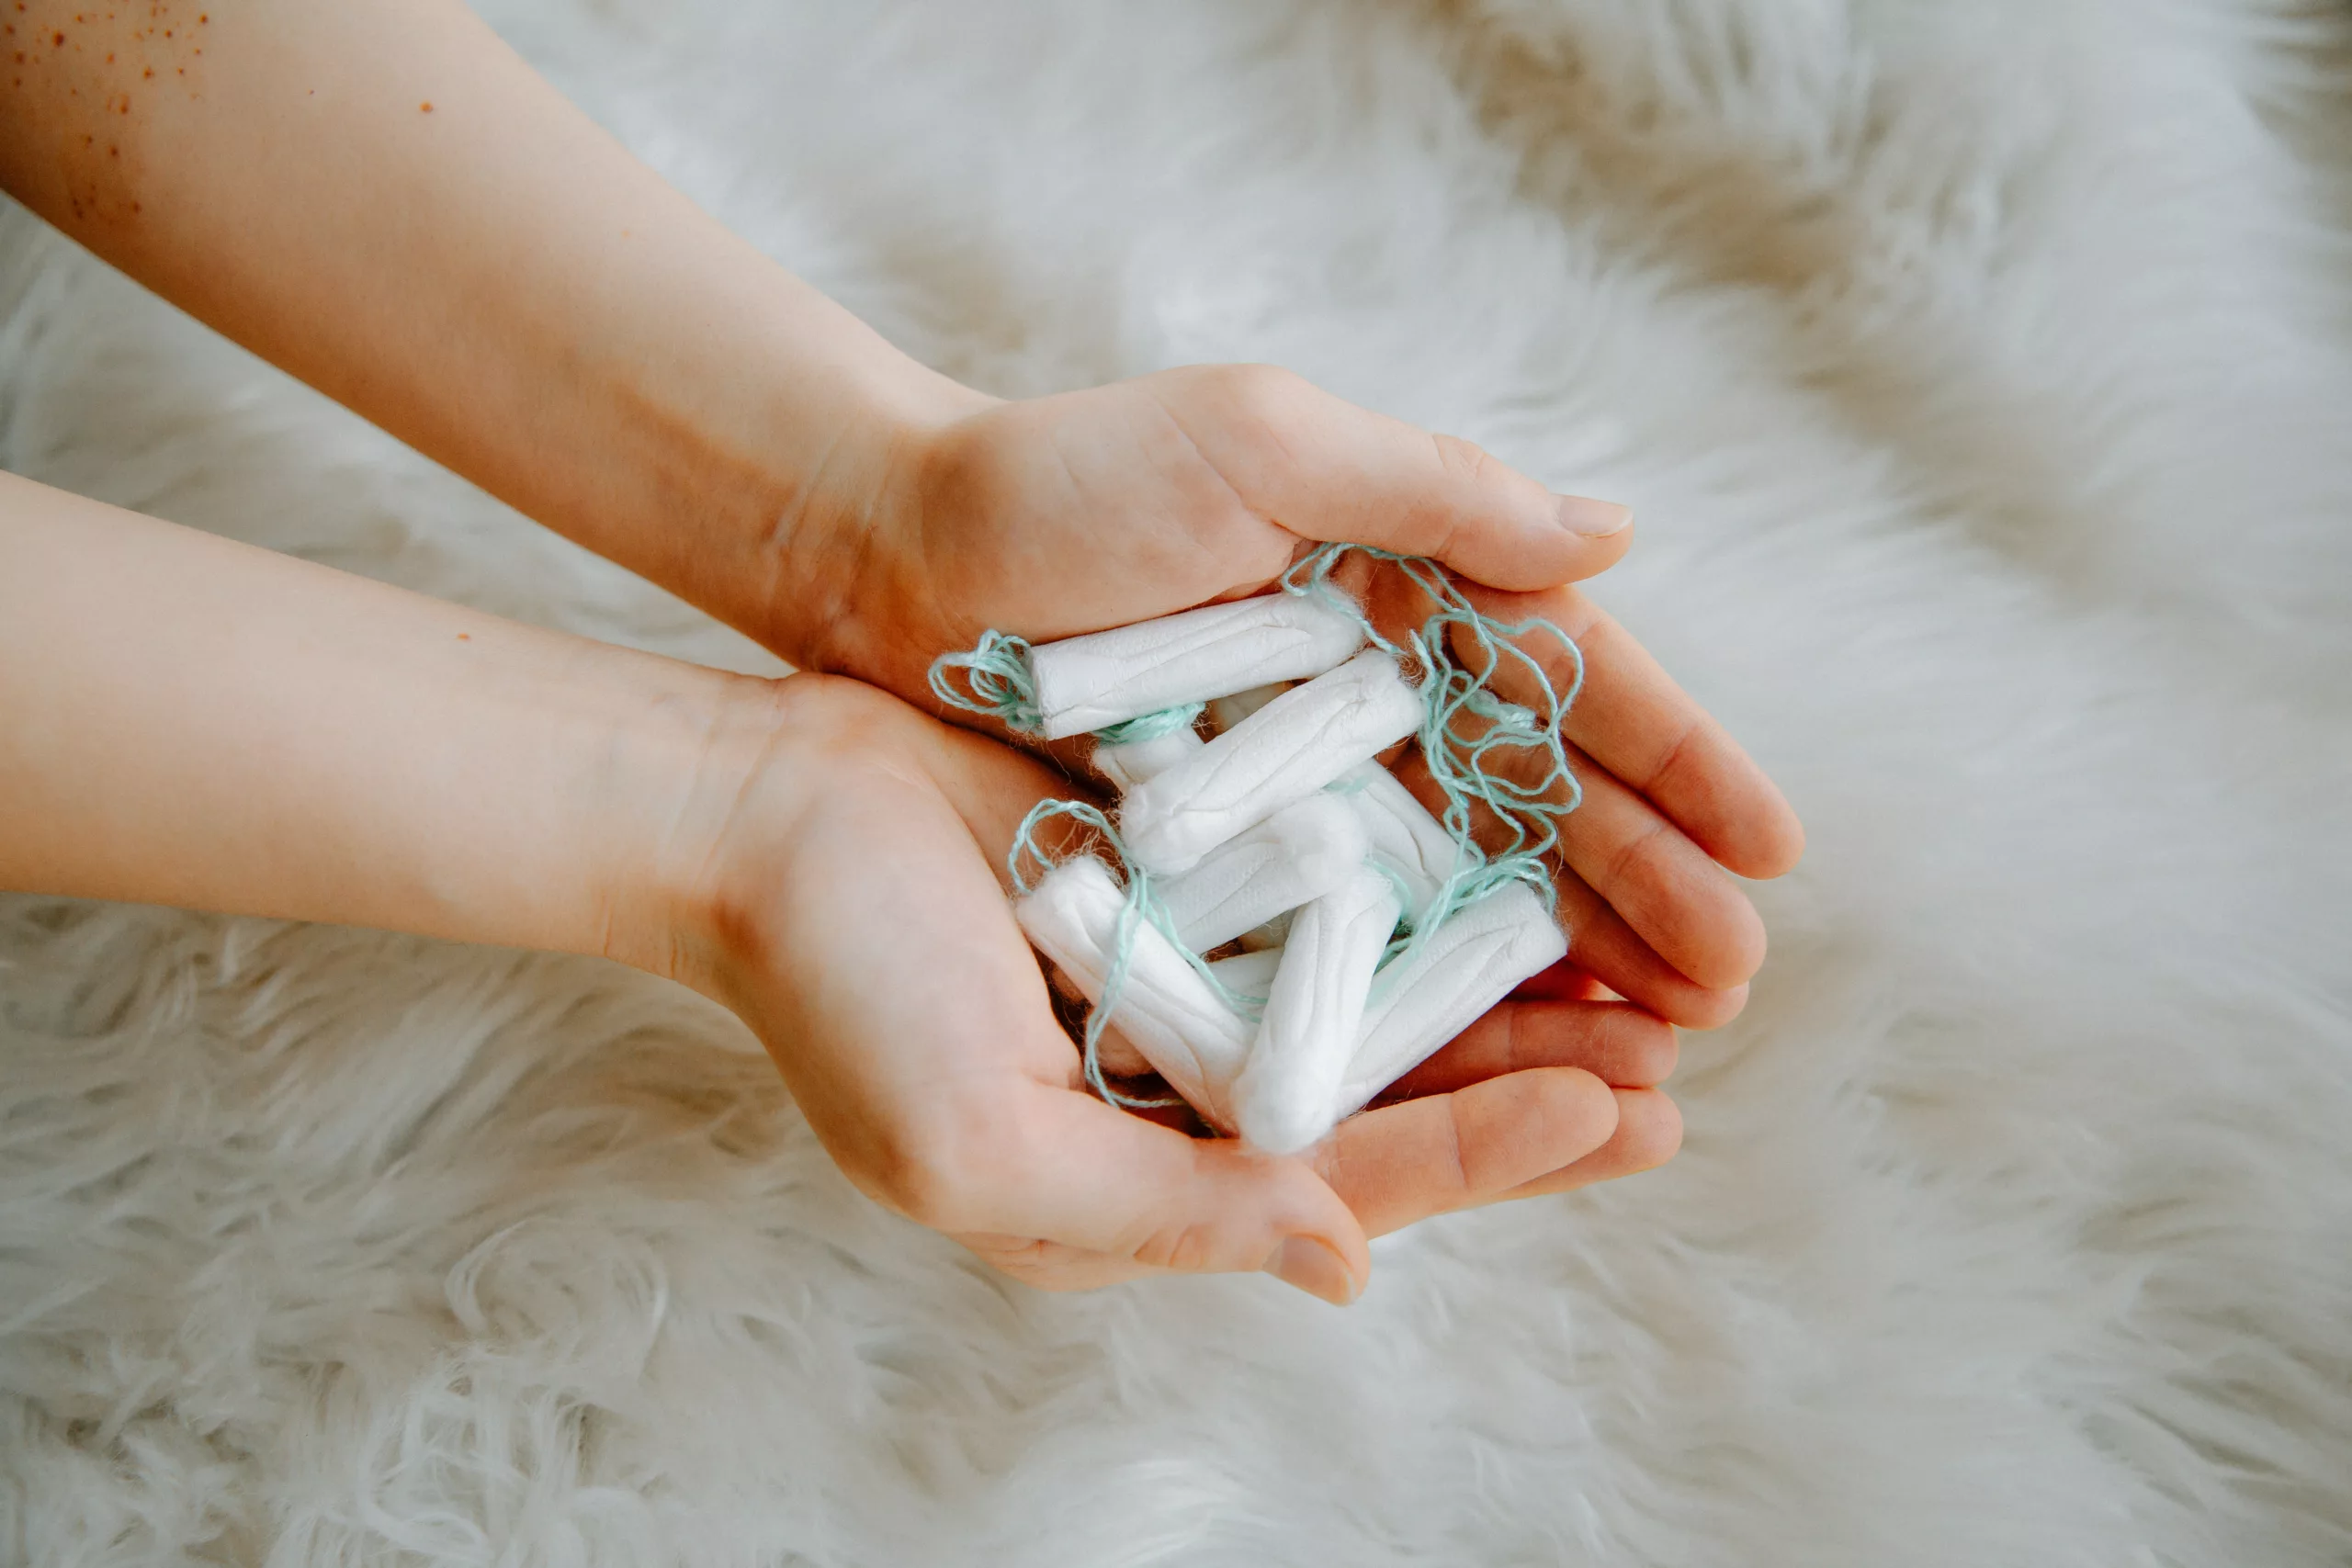 Top 5 Organic Tampons That Are Safe, Sustainable, and Effective